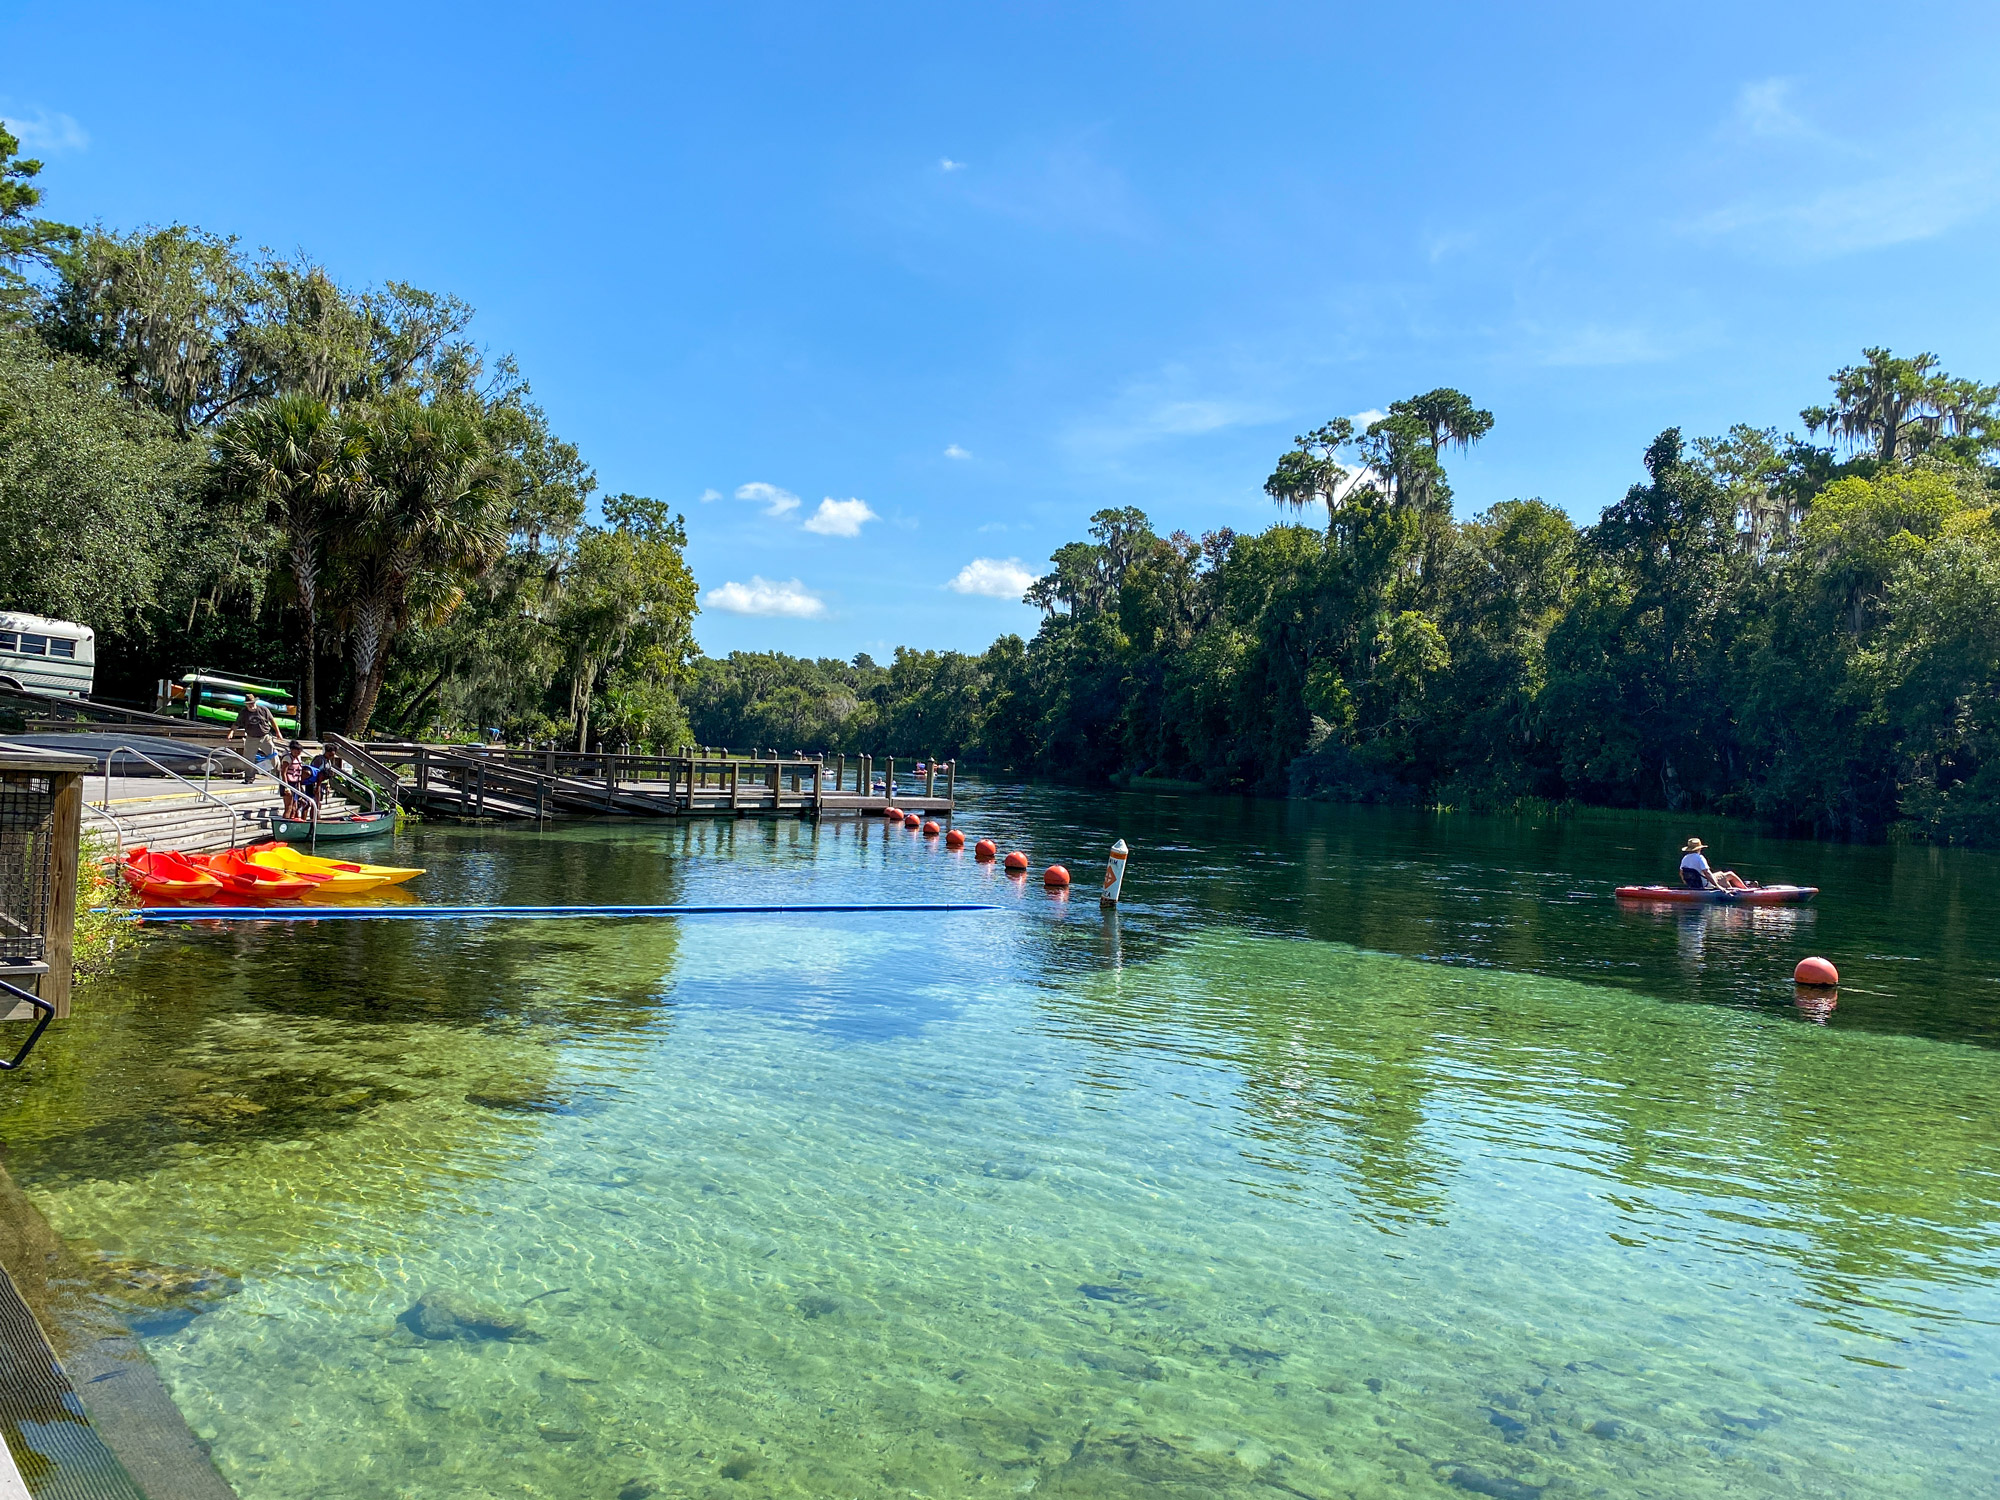 Things to do in Citrus Springs: Float down Rainbow Springs starting at KP Hole.